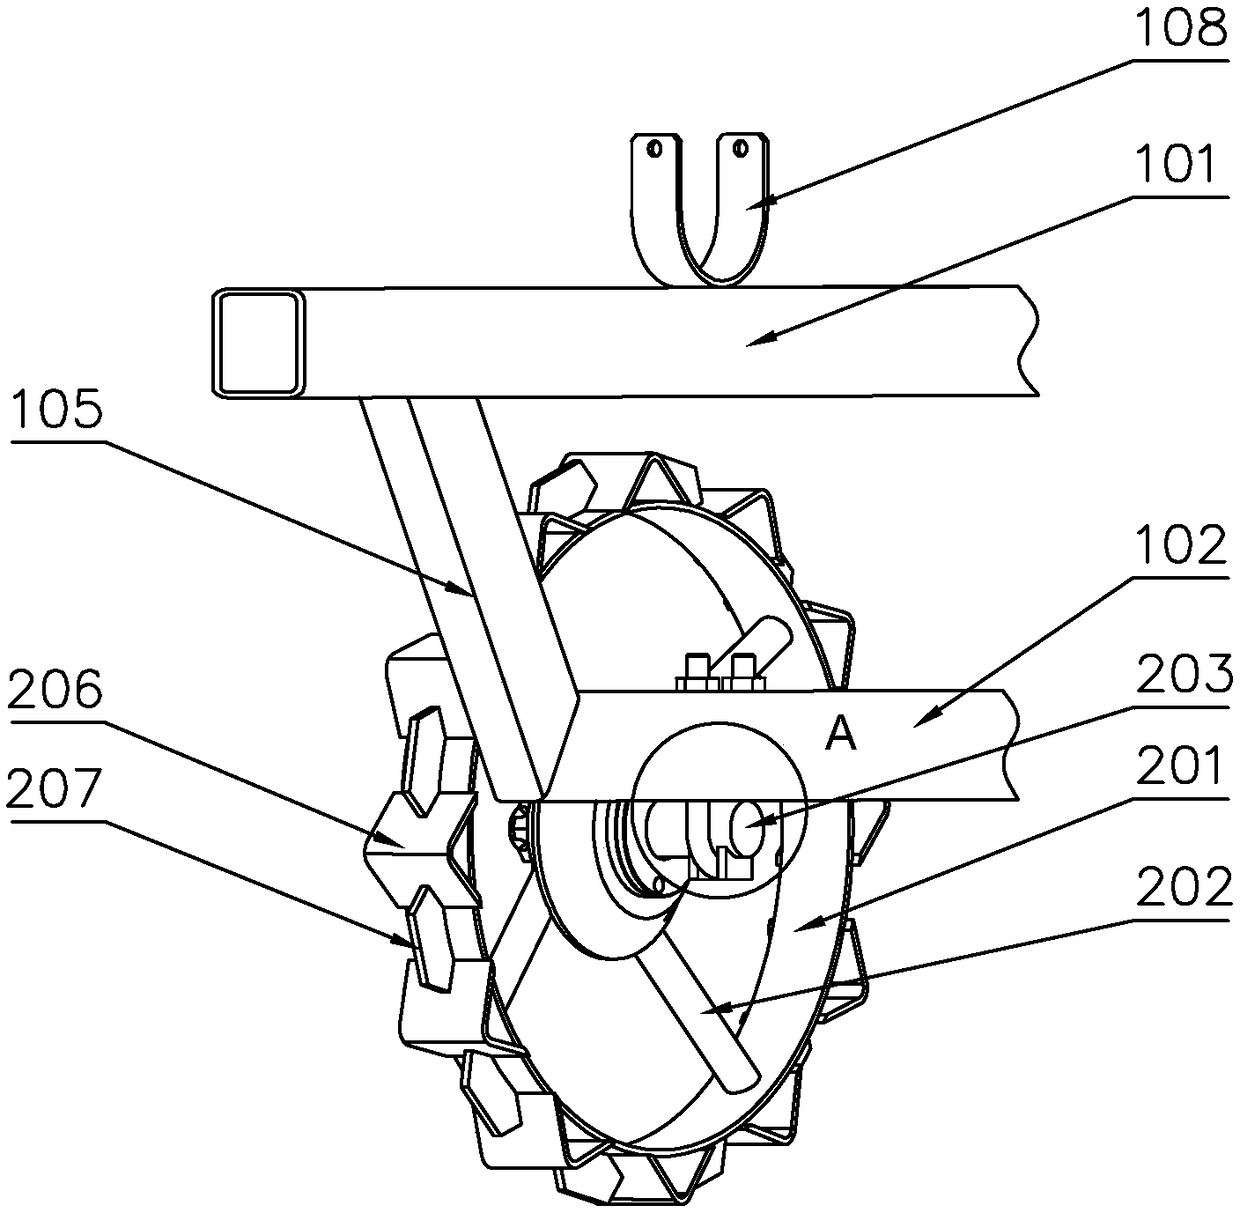 Furrow ridge film mulching device for agricultural use